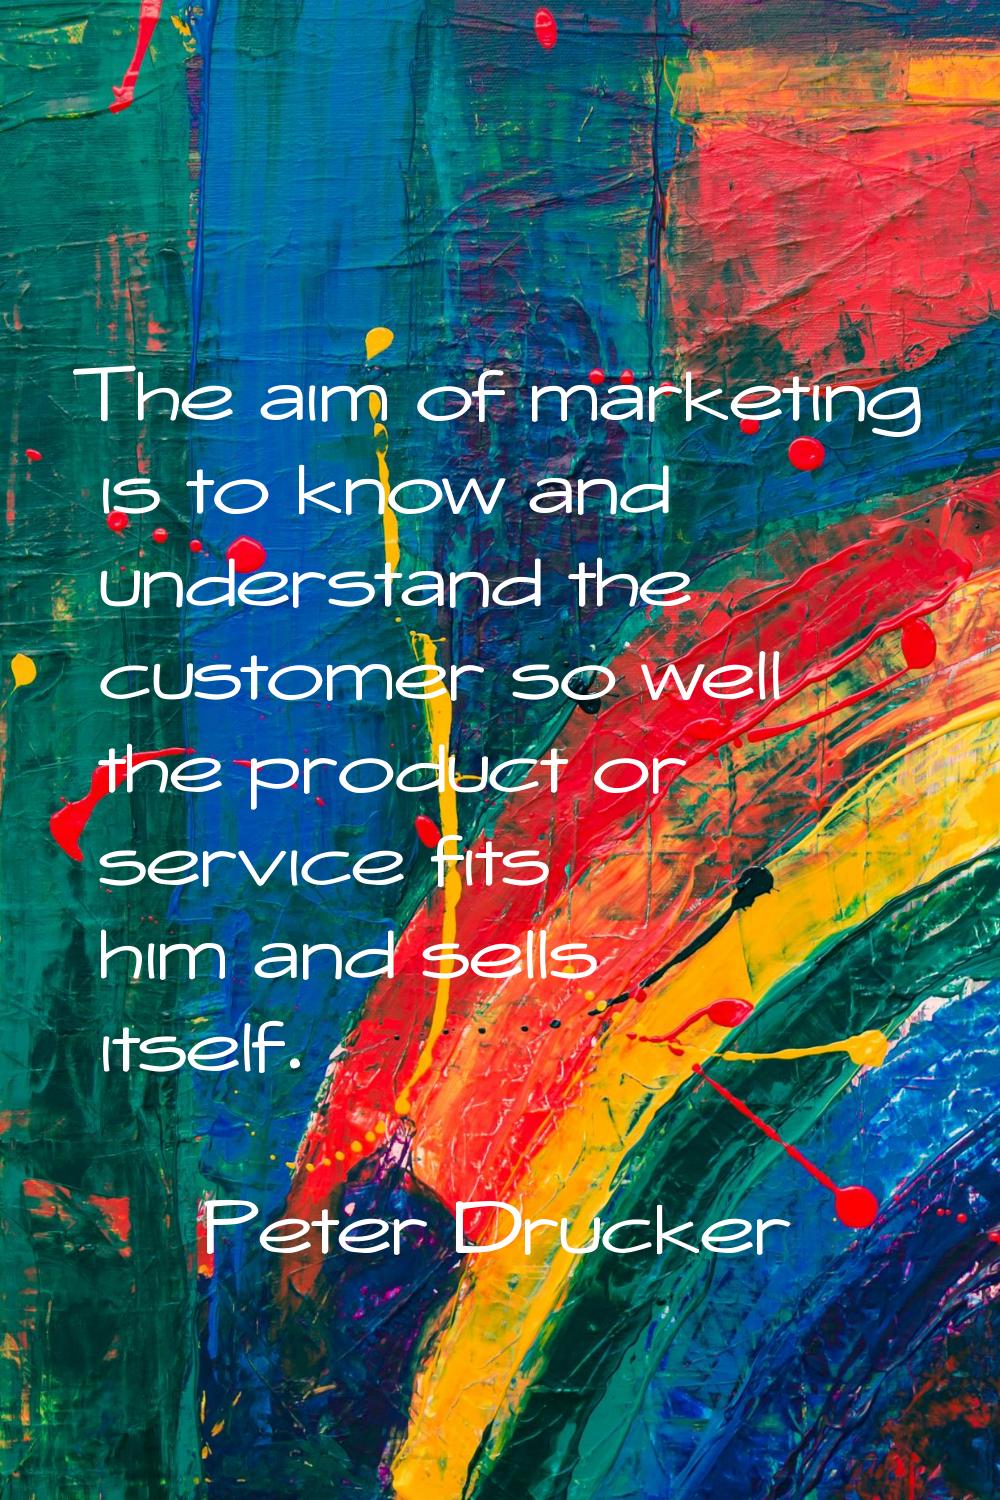 The aim of marketing is to know and understand the customer so well the product or service fits him